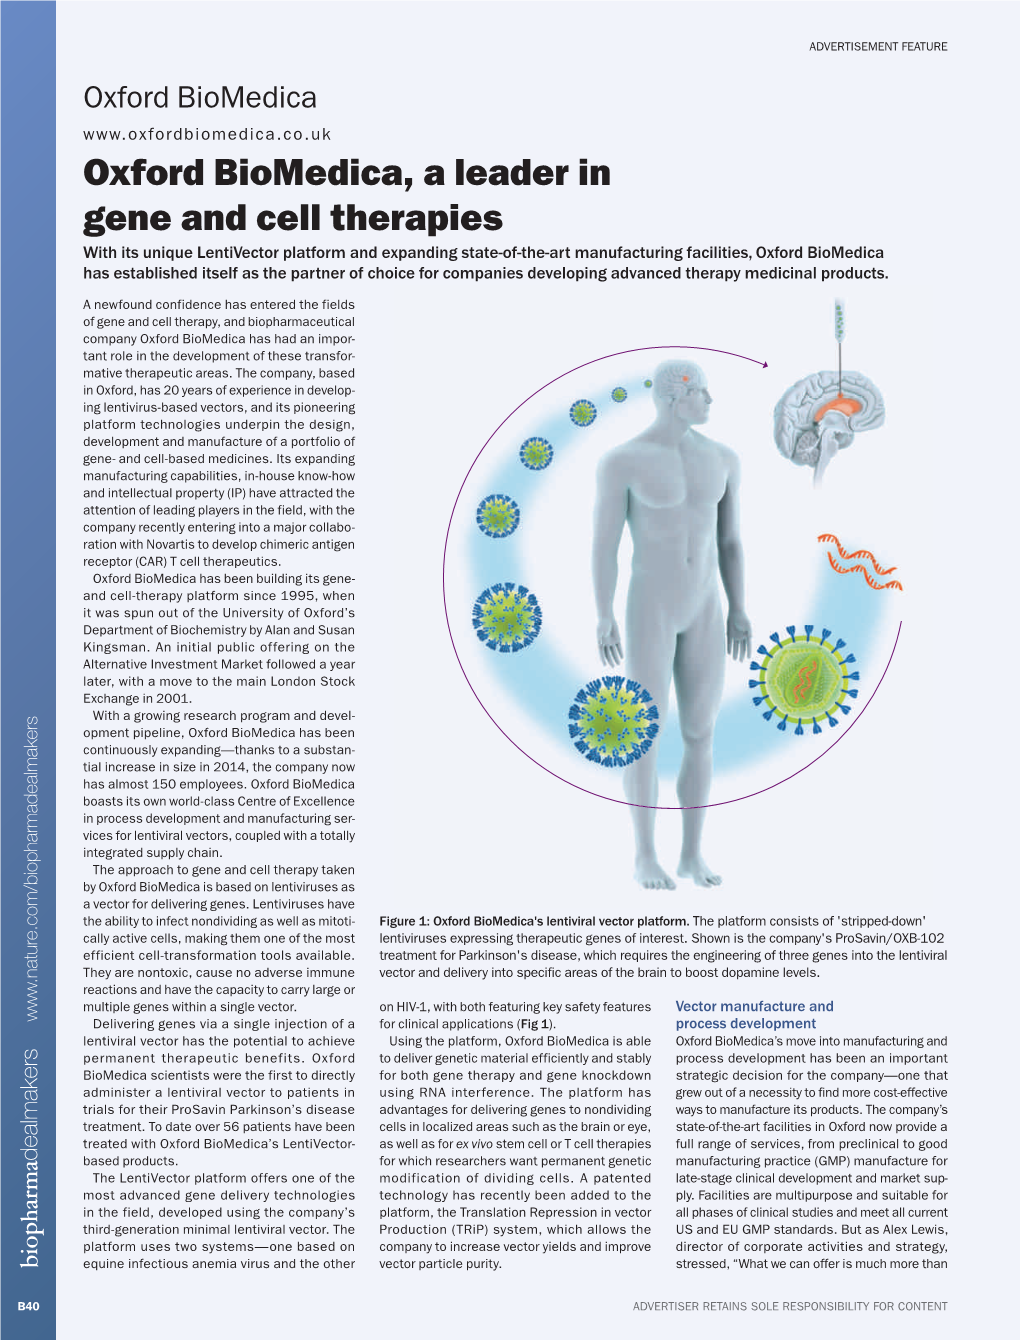 Oxford Biomedica, a Leader in Gene and Cell Therapies